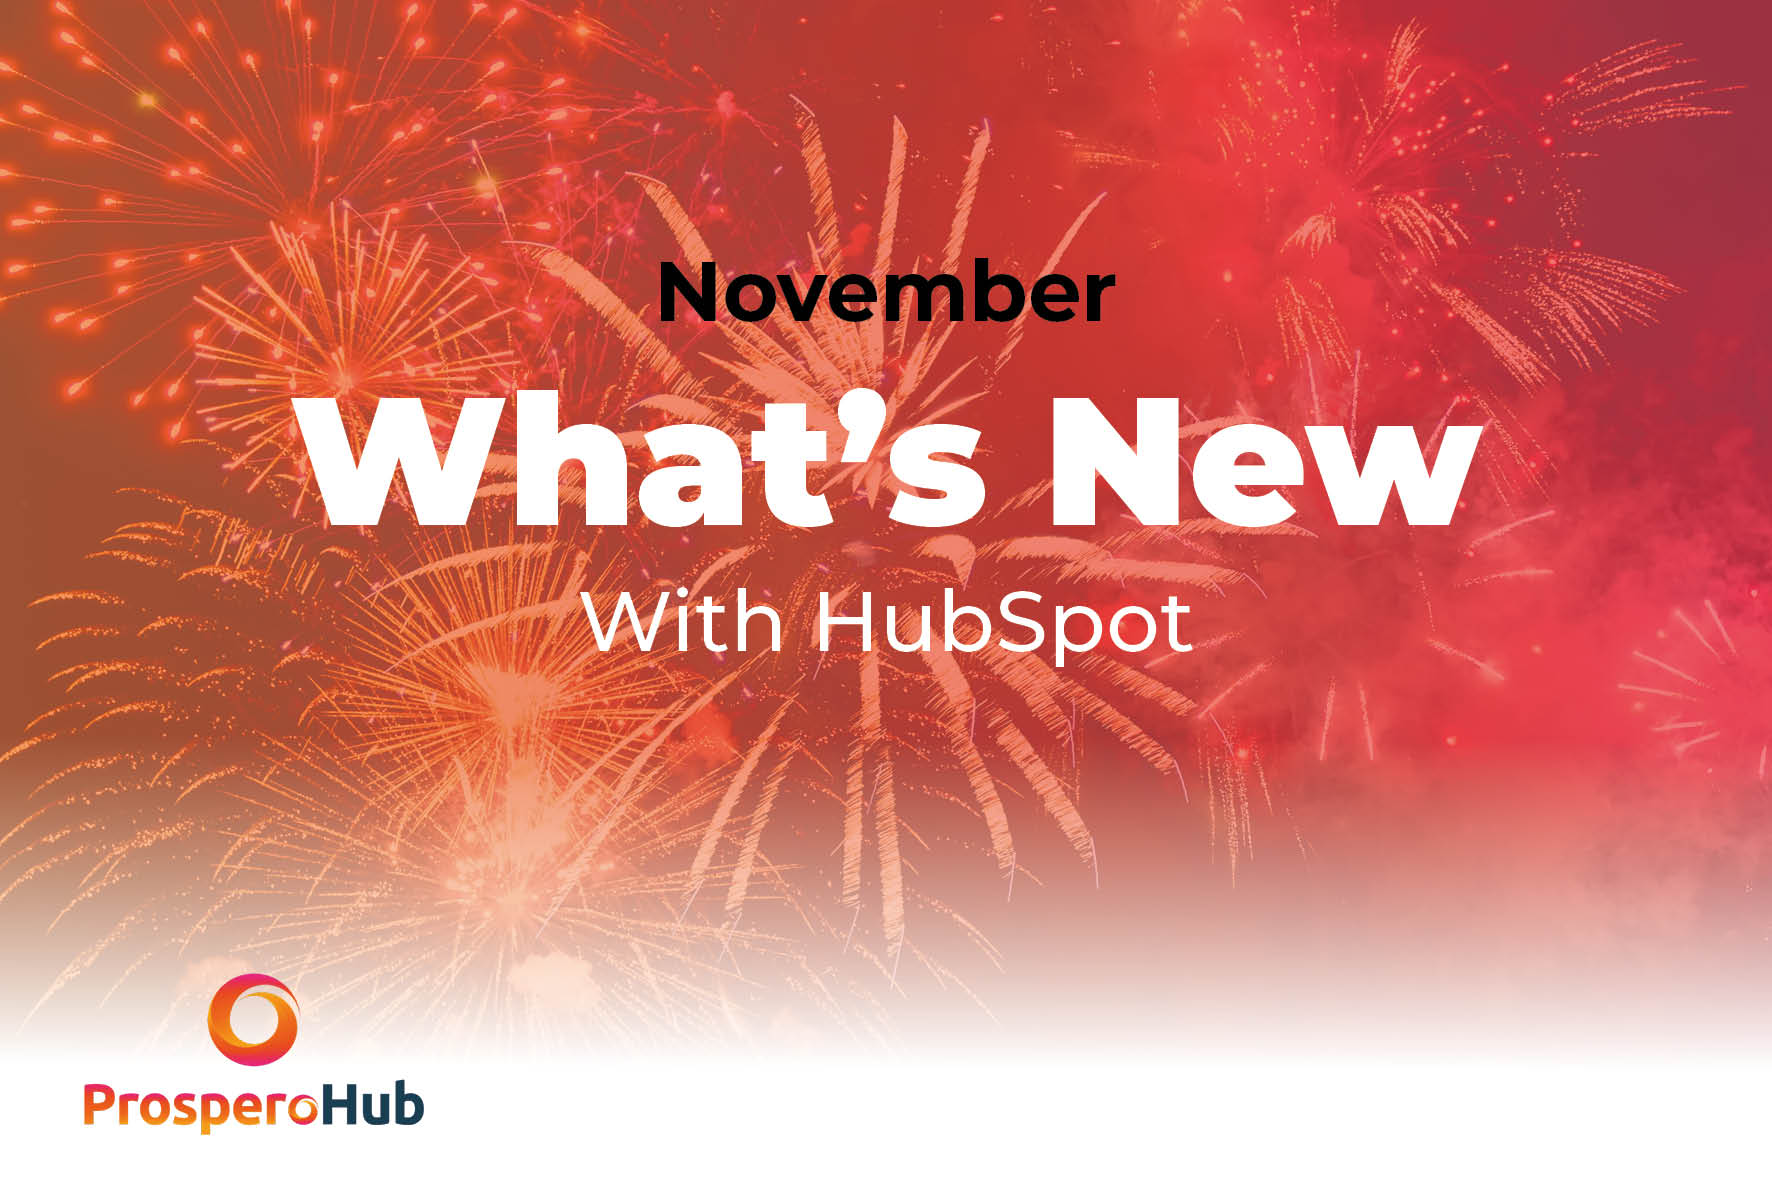 🎆November: What's New with HubSpot?